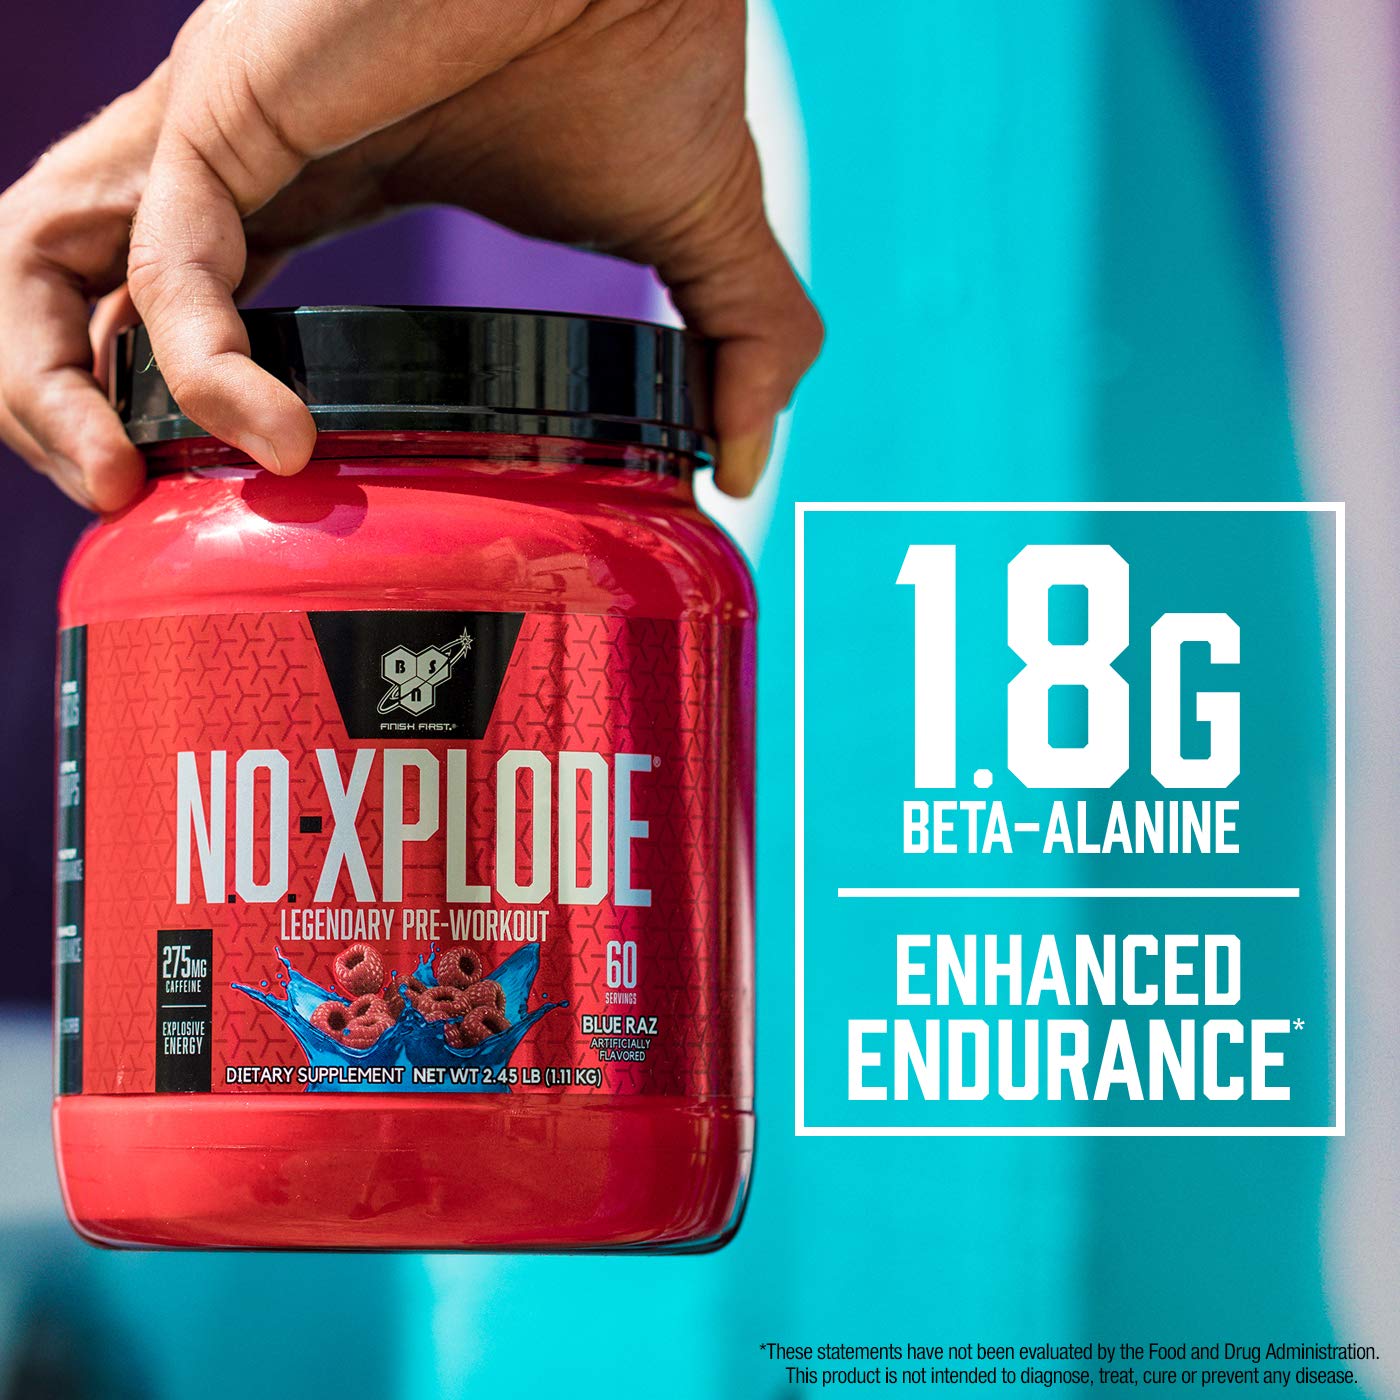 BSN N.O.-XPLODE Pre Workout Supplement with Creatine, Beta-Alanine, and Energy, Flavor: Fruit Punch, 60 Servings (Package may vary)